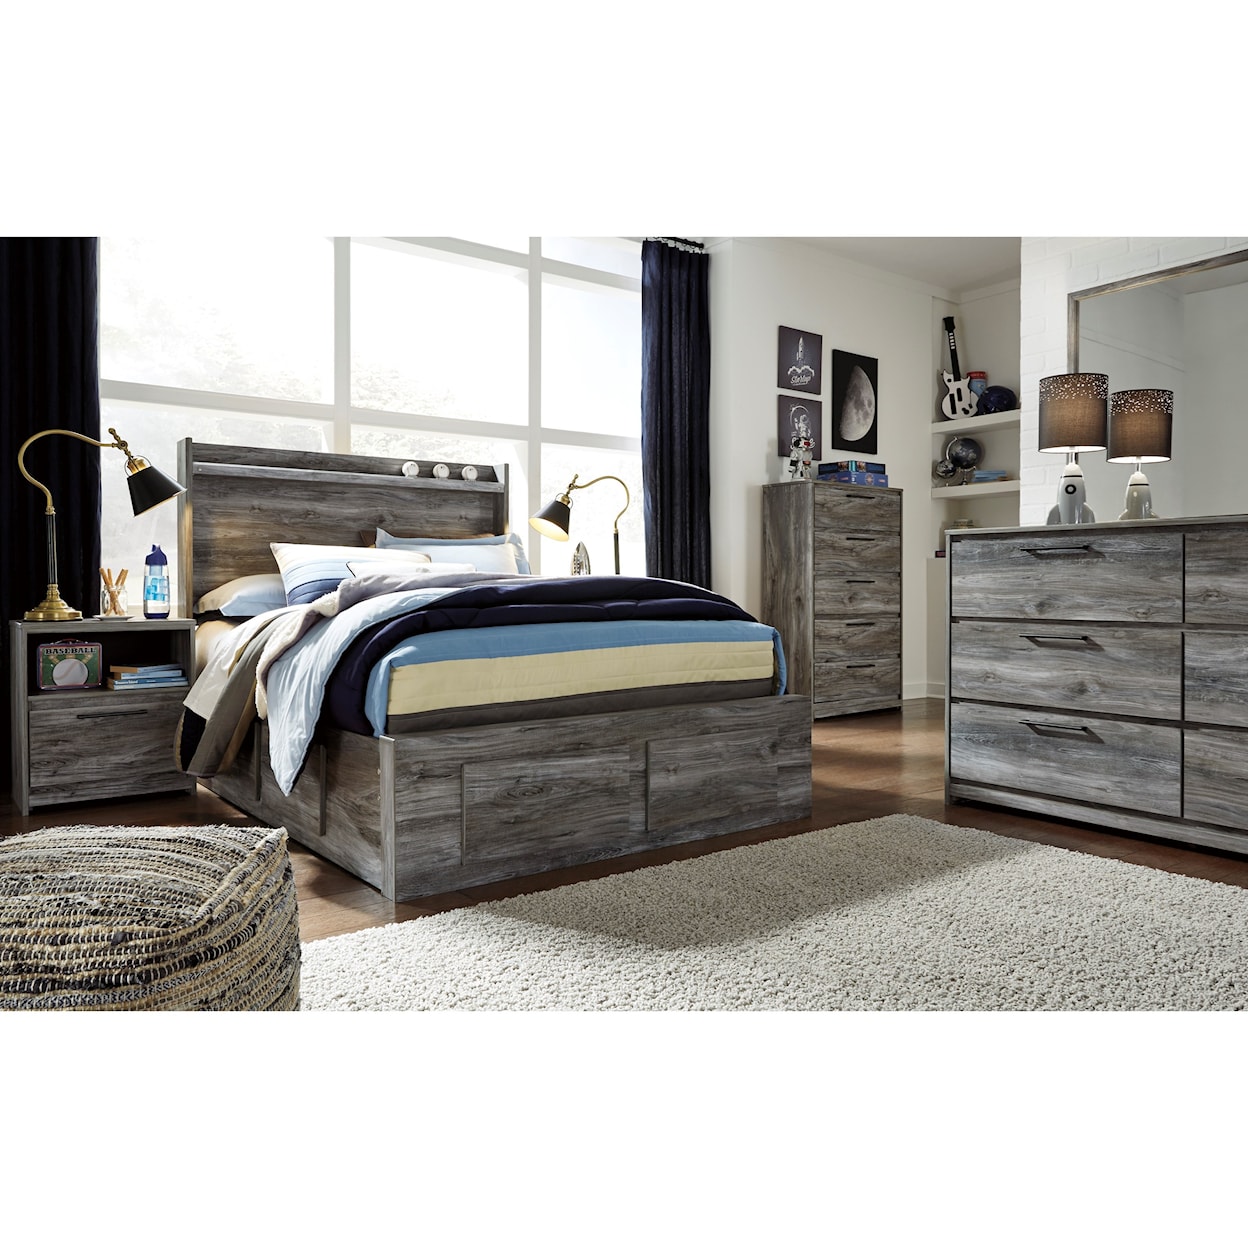 Signature Design by Ashley Baystorm Full Storage Bed with 6 Drawers